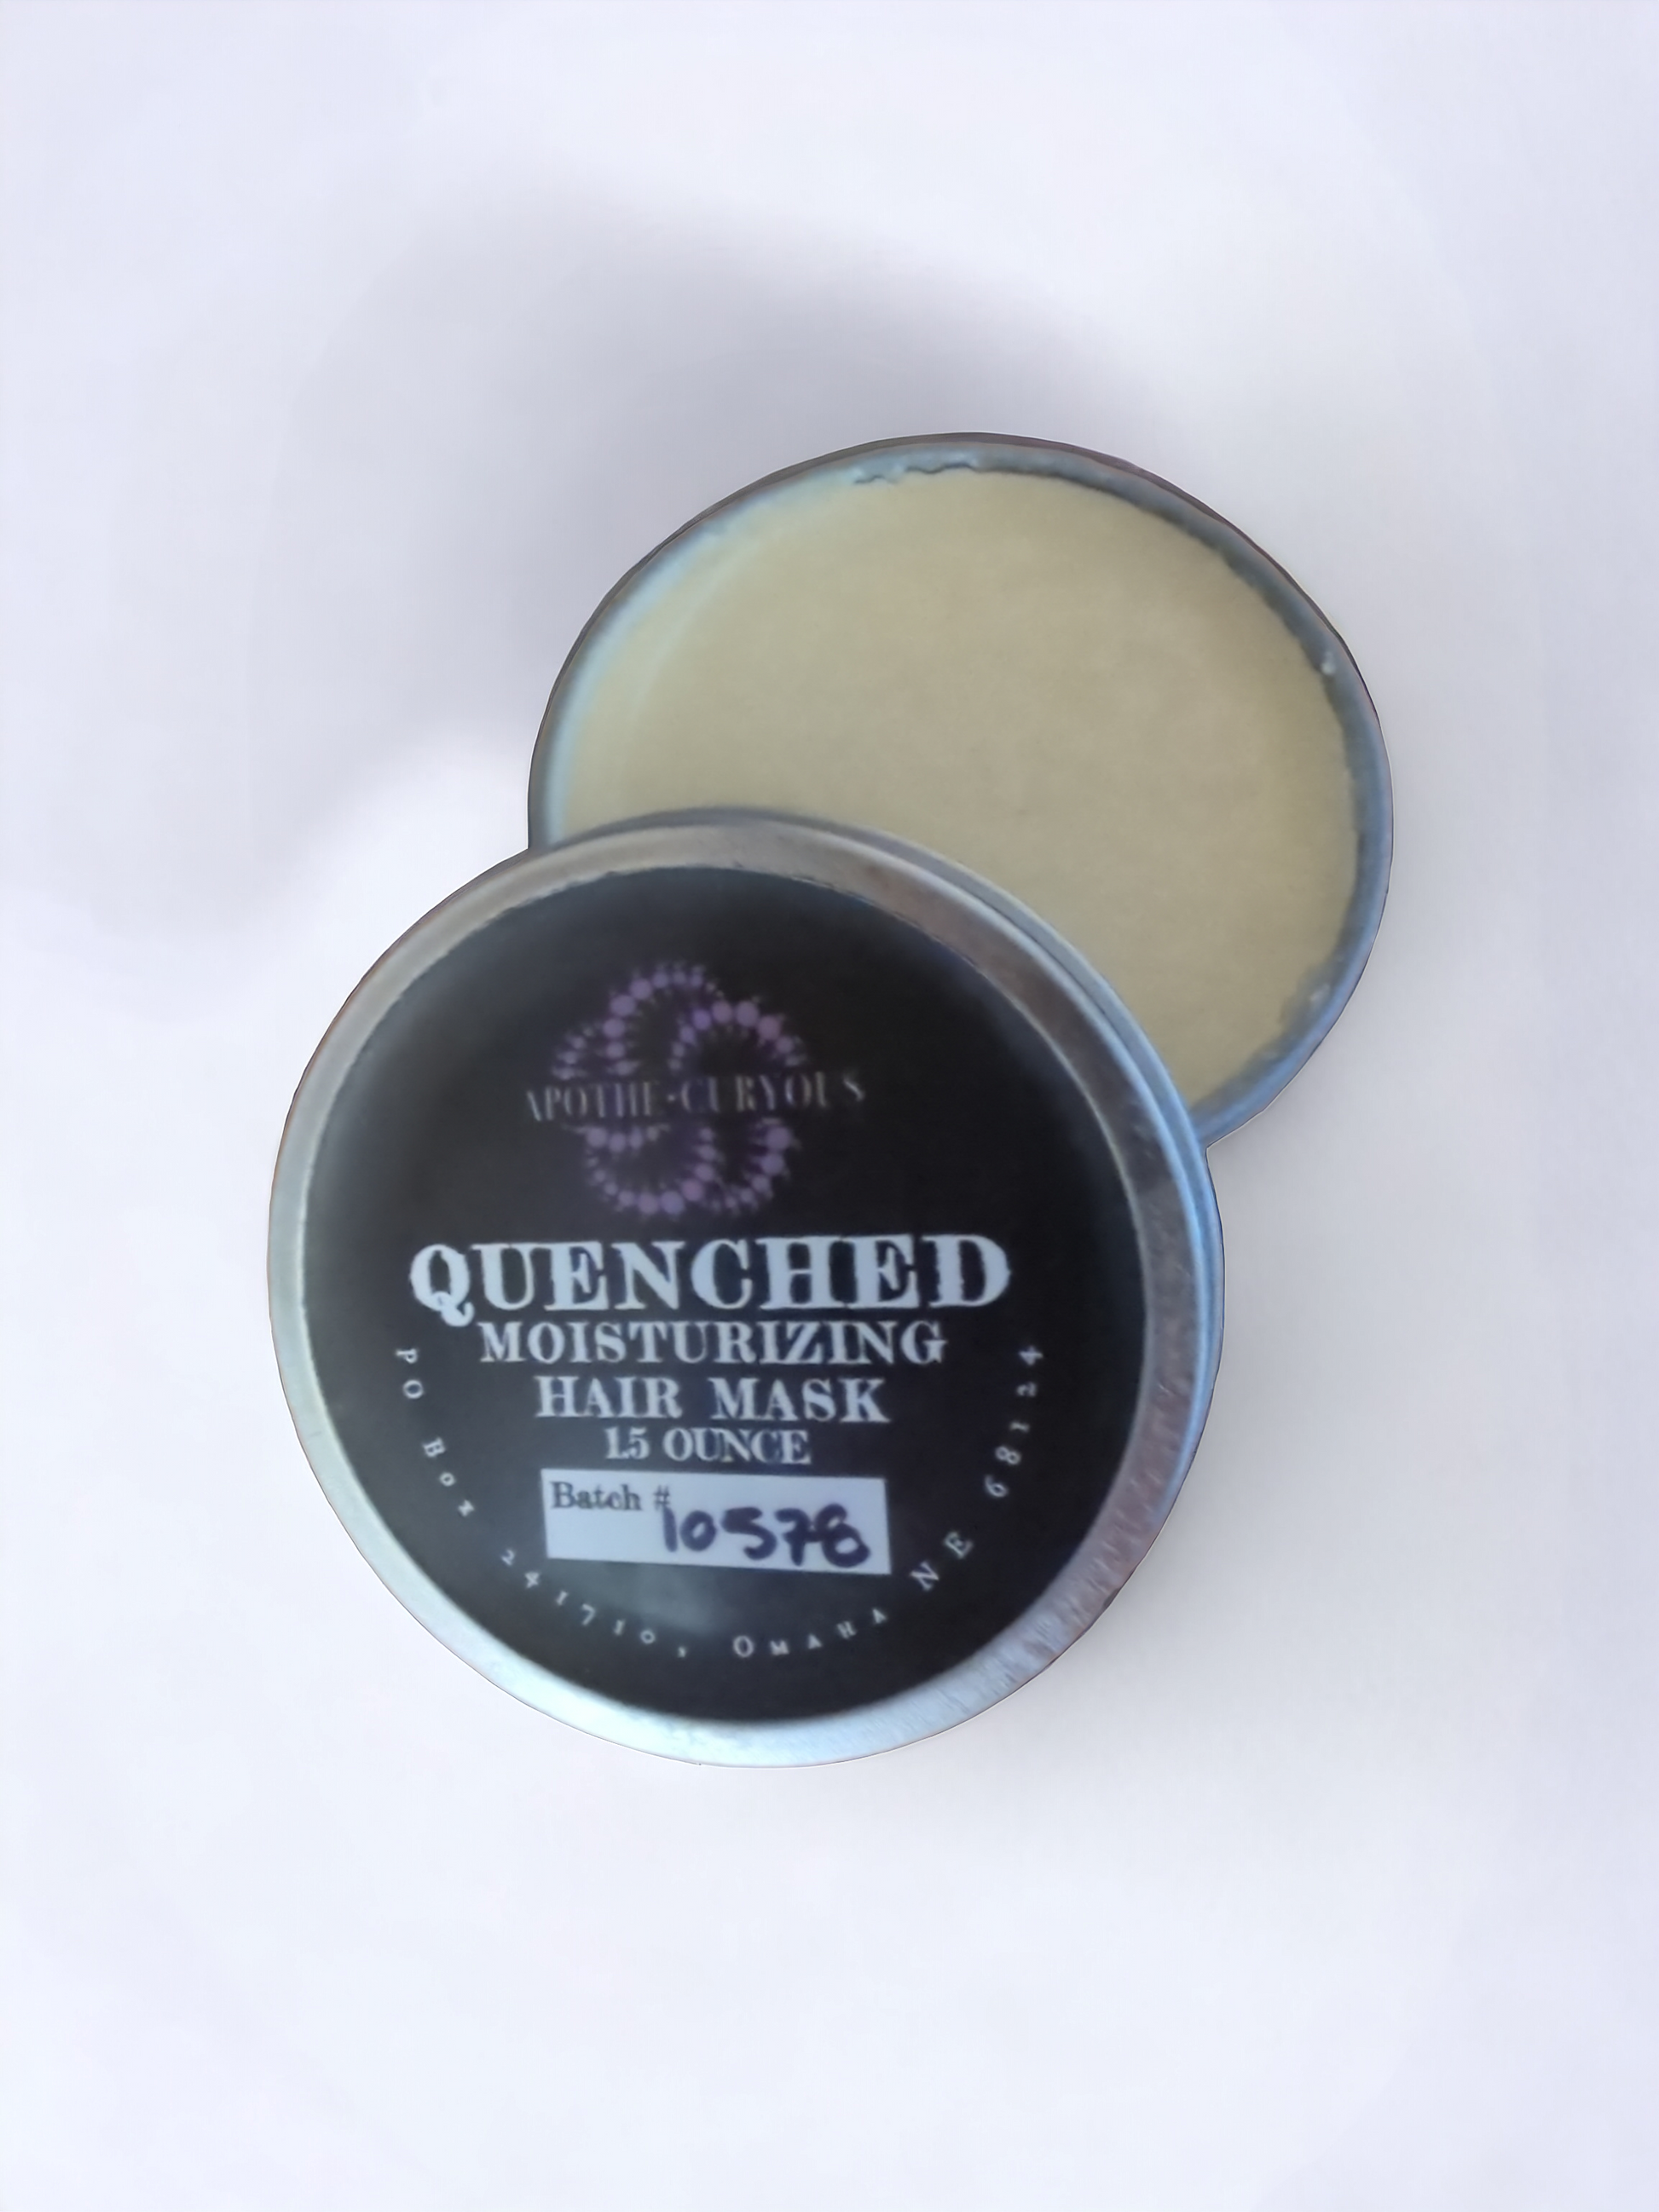 Quenched hair mask lid off, aluminum tin, Apothecuryous